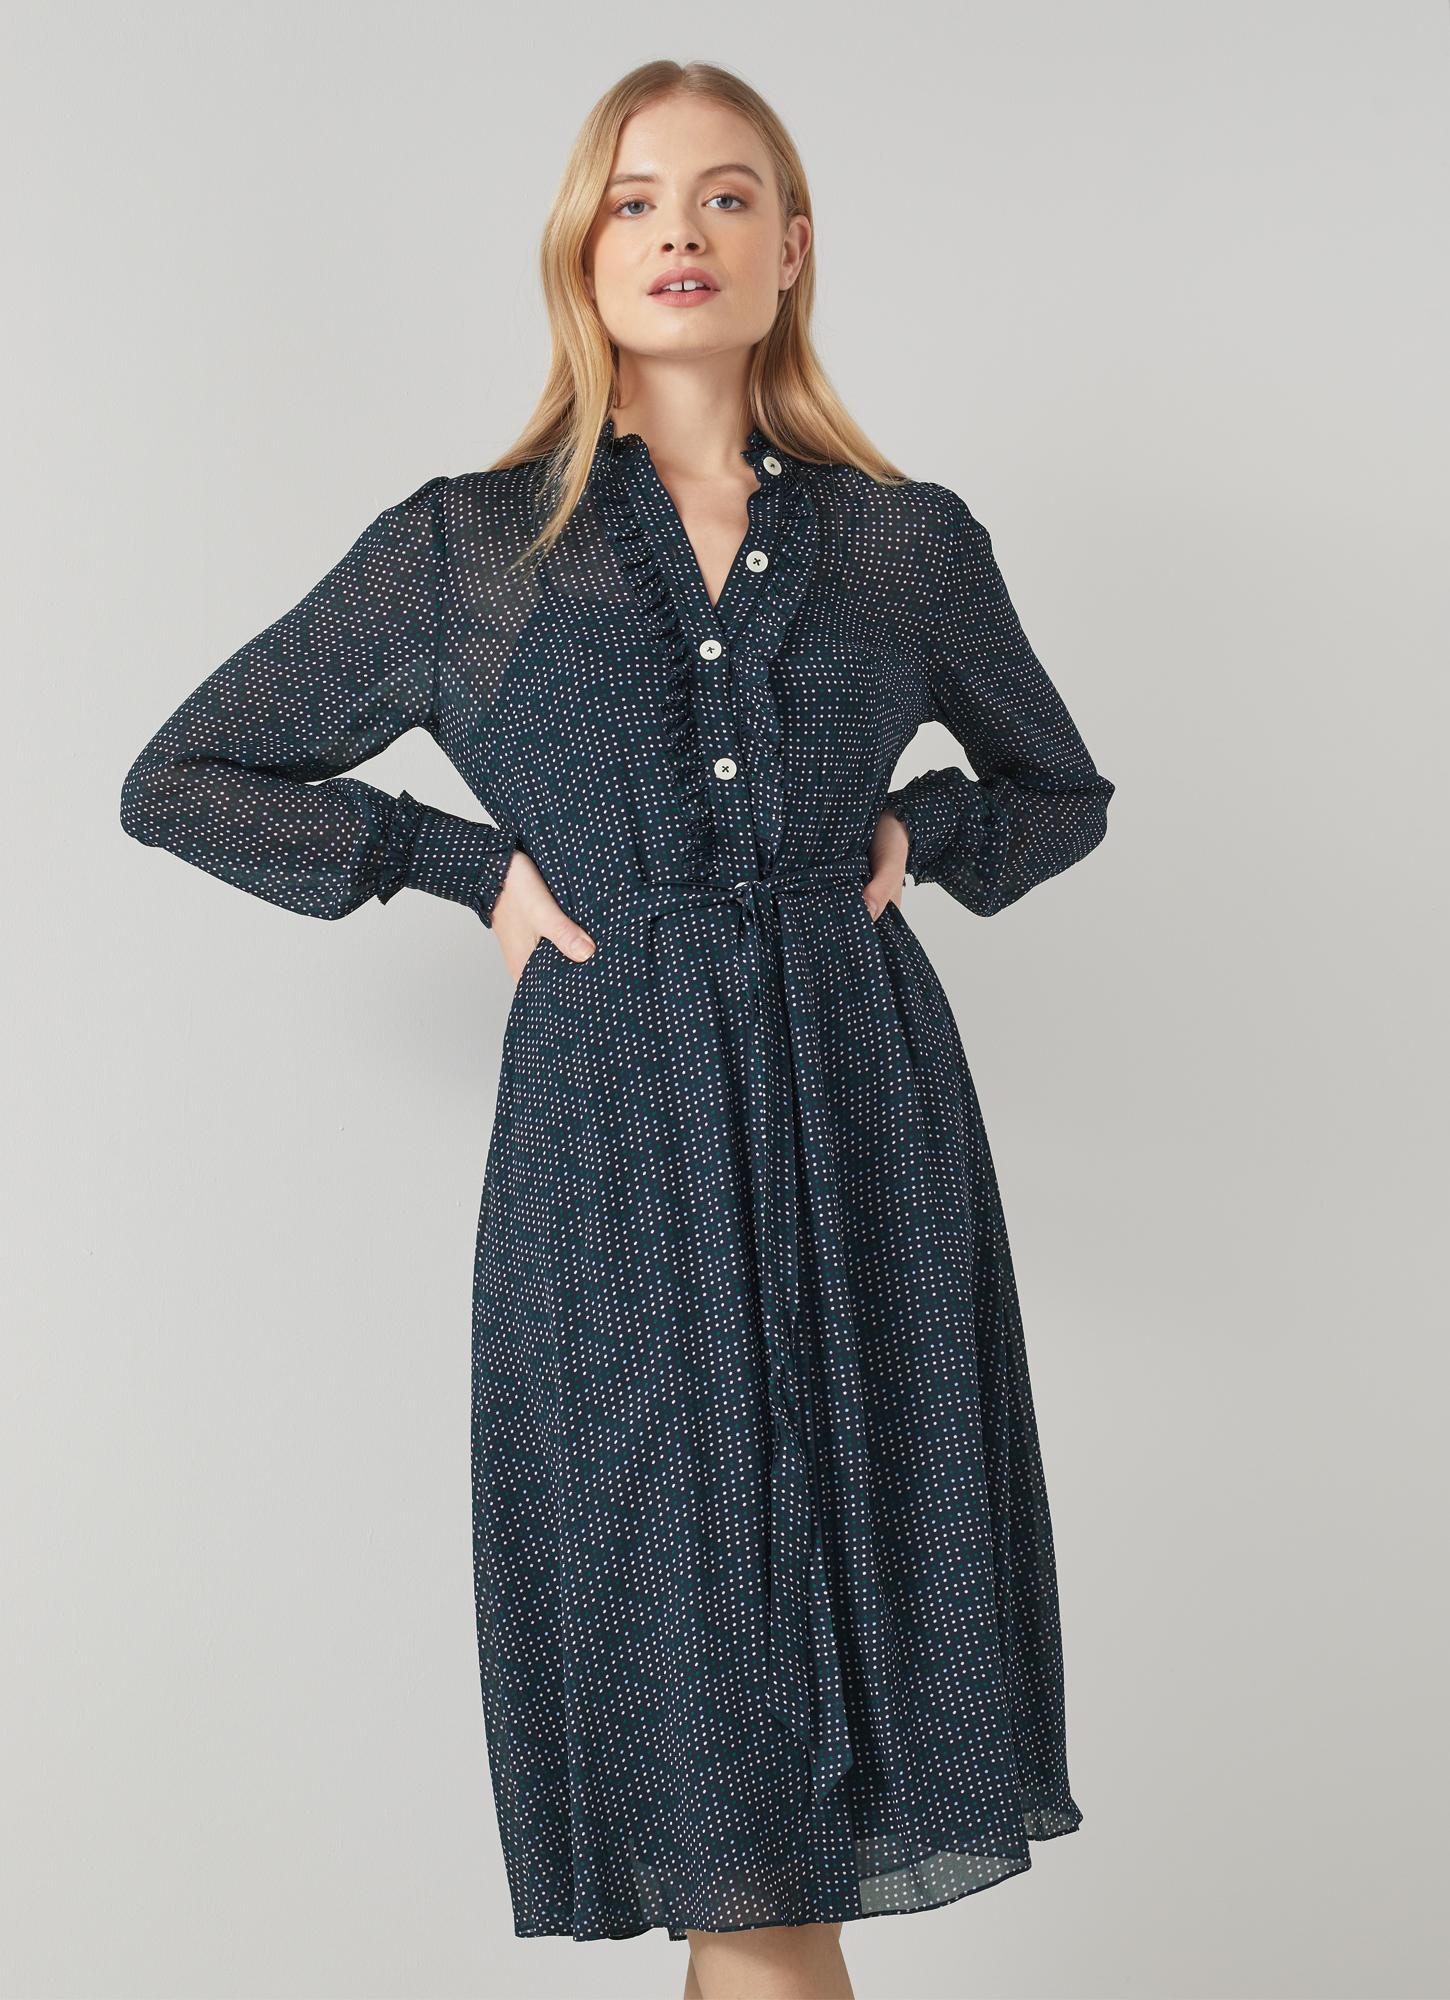 Tish Cream Silk and Navy Crepe Dress | View All | Clothing 